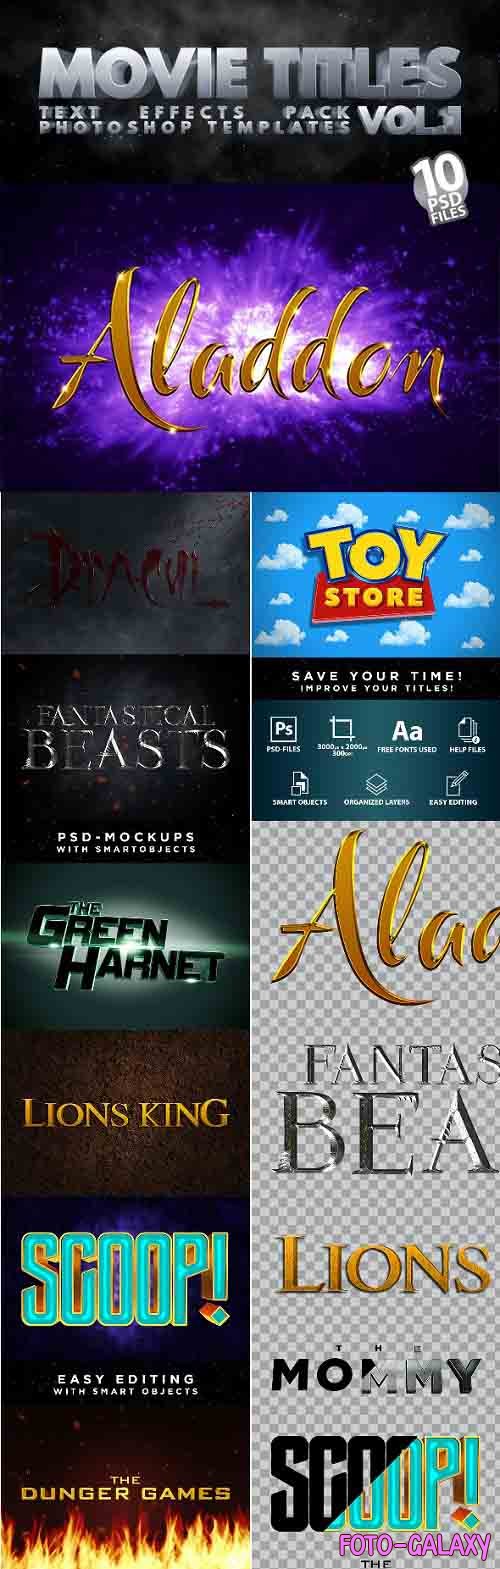 MOVIE TITLES - Vol.1 | Text-Effects/Mockups | Template-Pack - 30111191